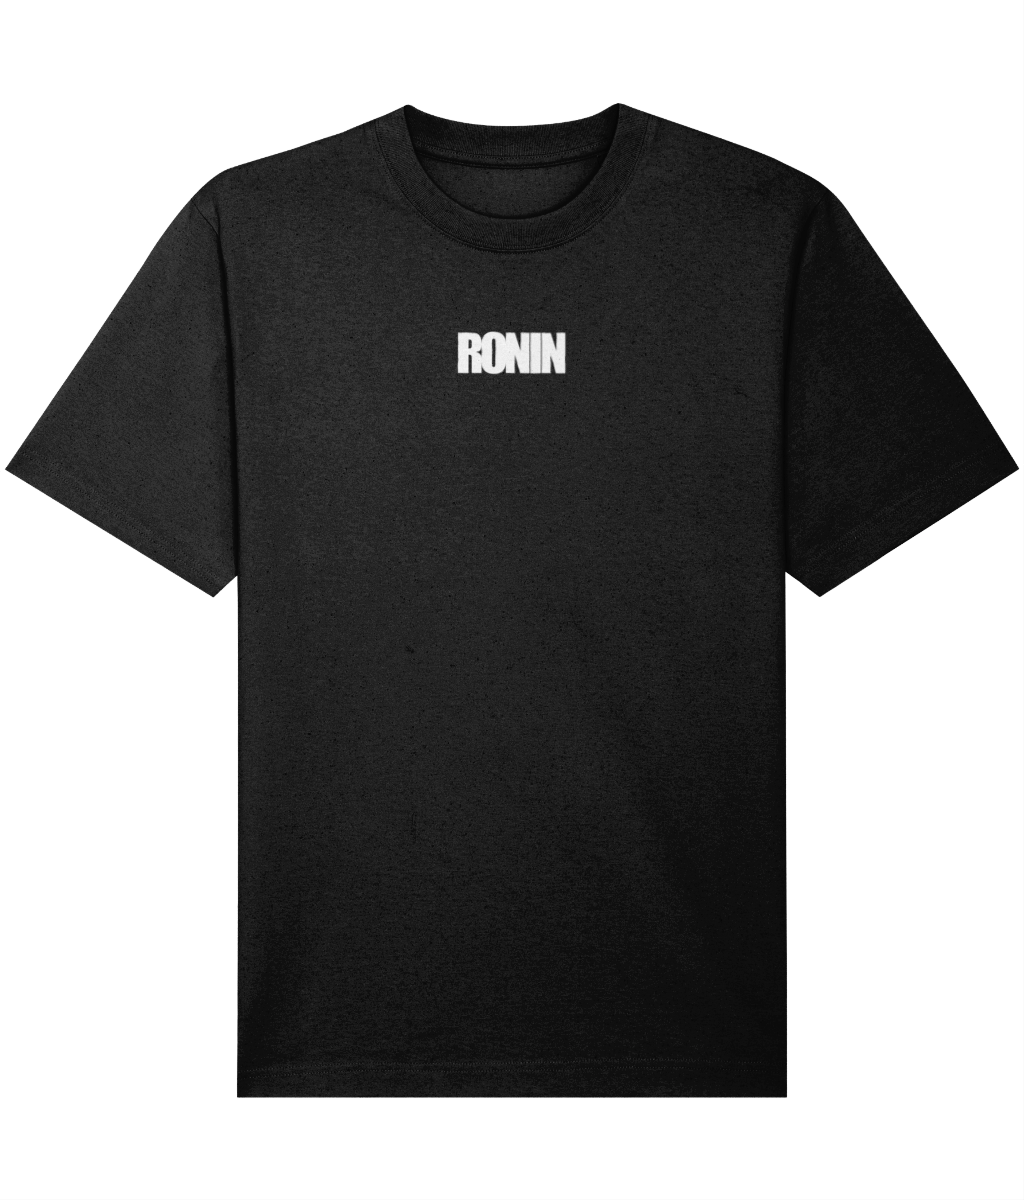 Punch Out Ronin oversized tee